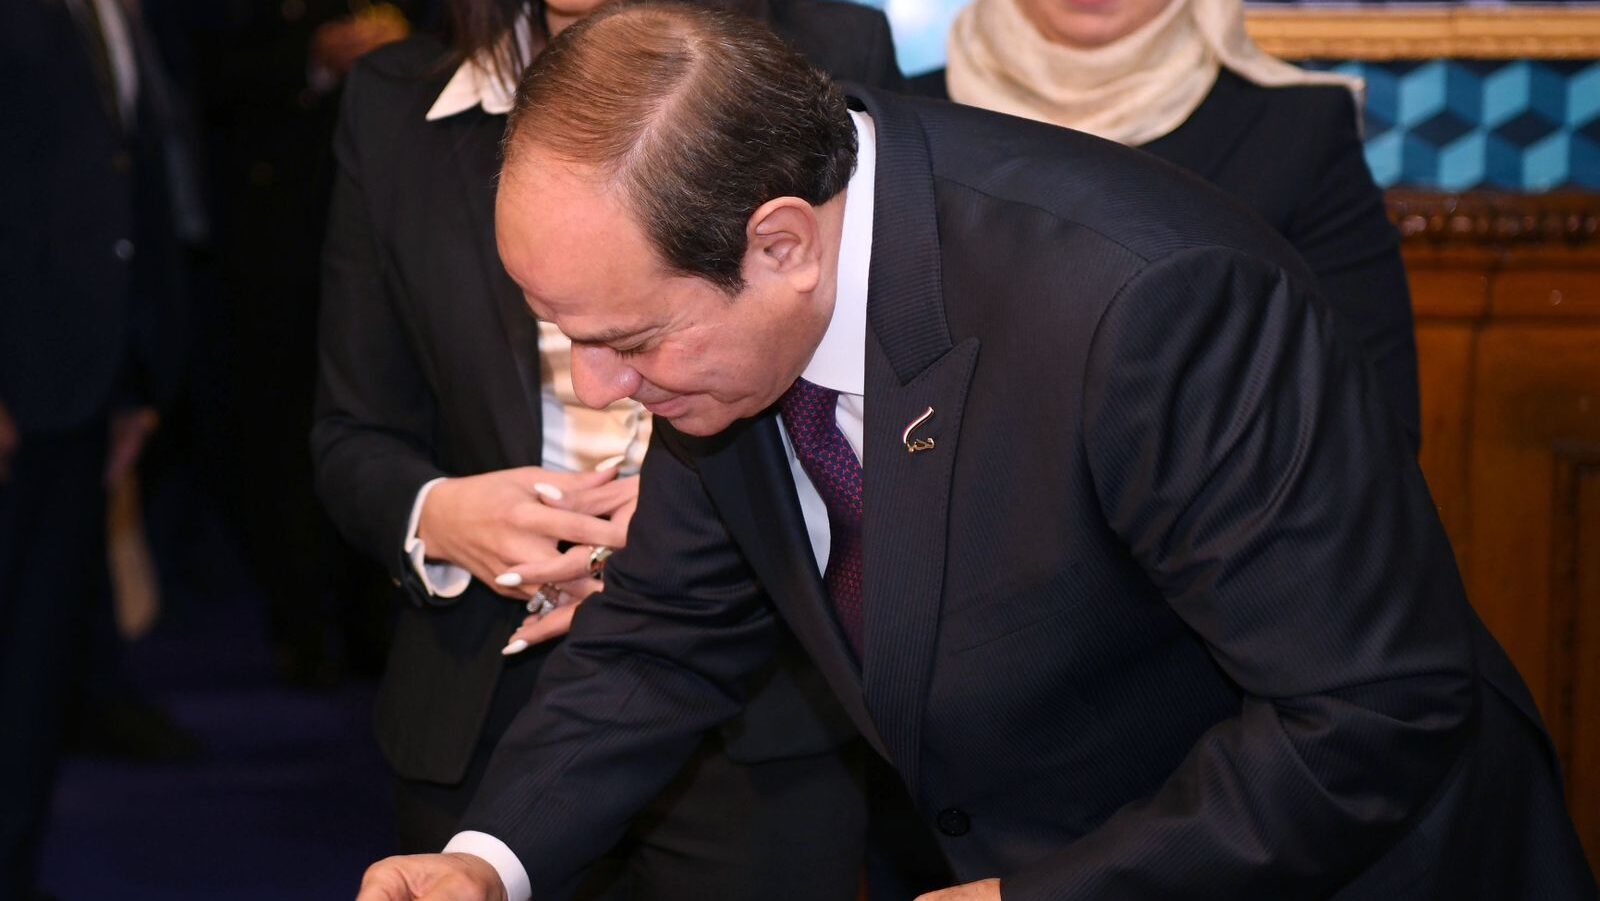 Egyptian President Sisi Seeks Third Term, Elections to Begin Sunday